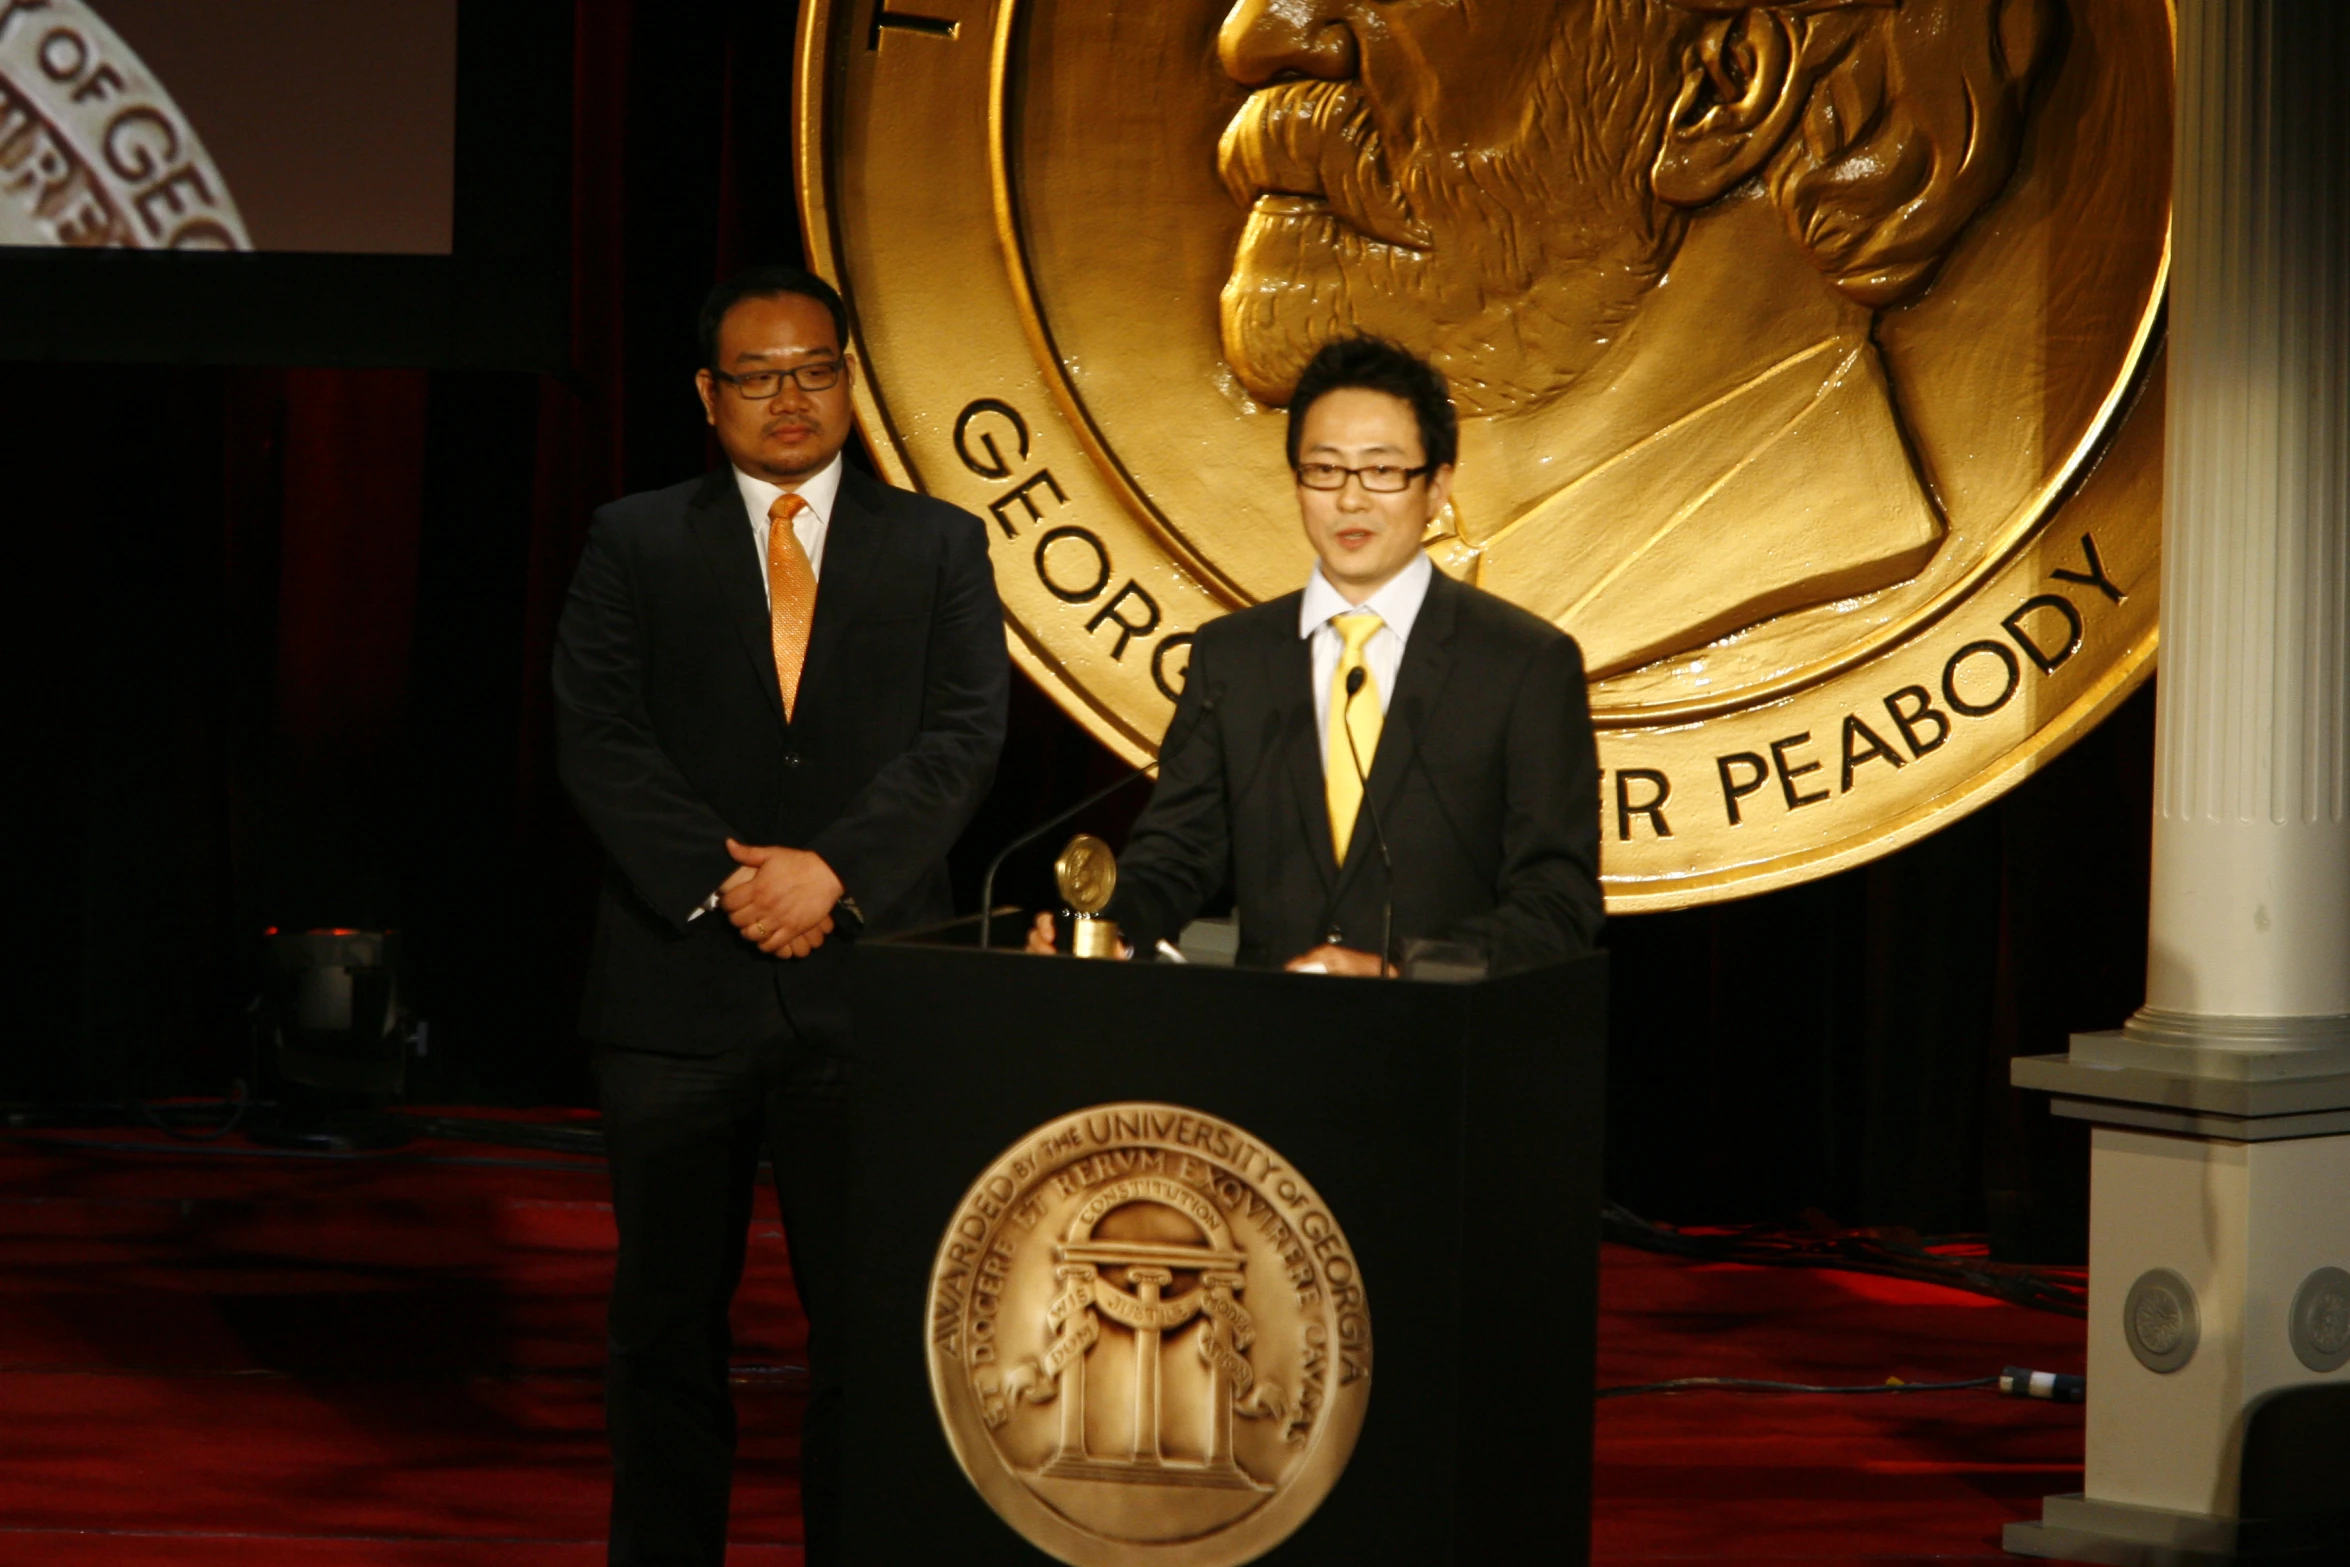 two men standing behind the podium in front of the logo